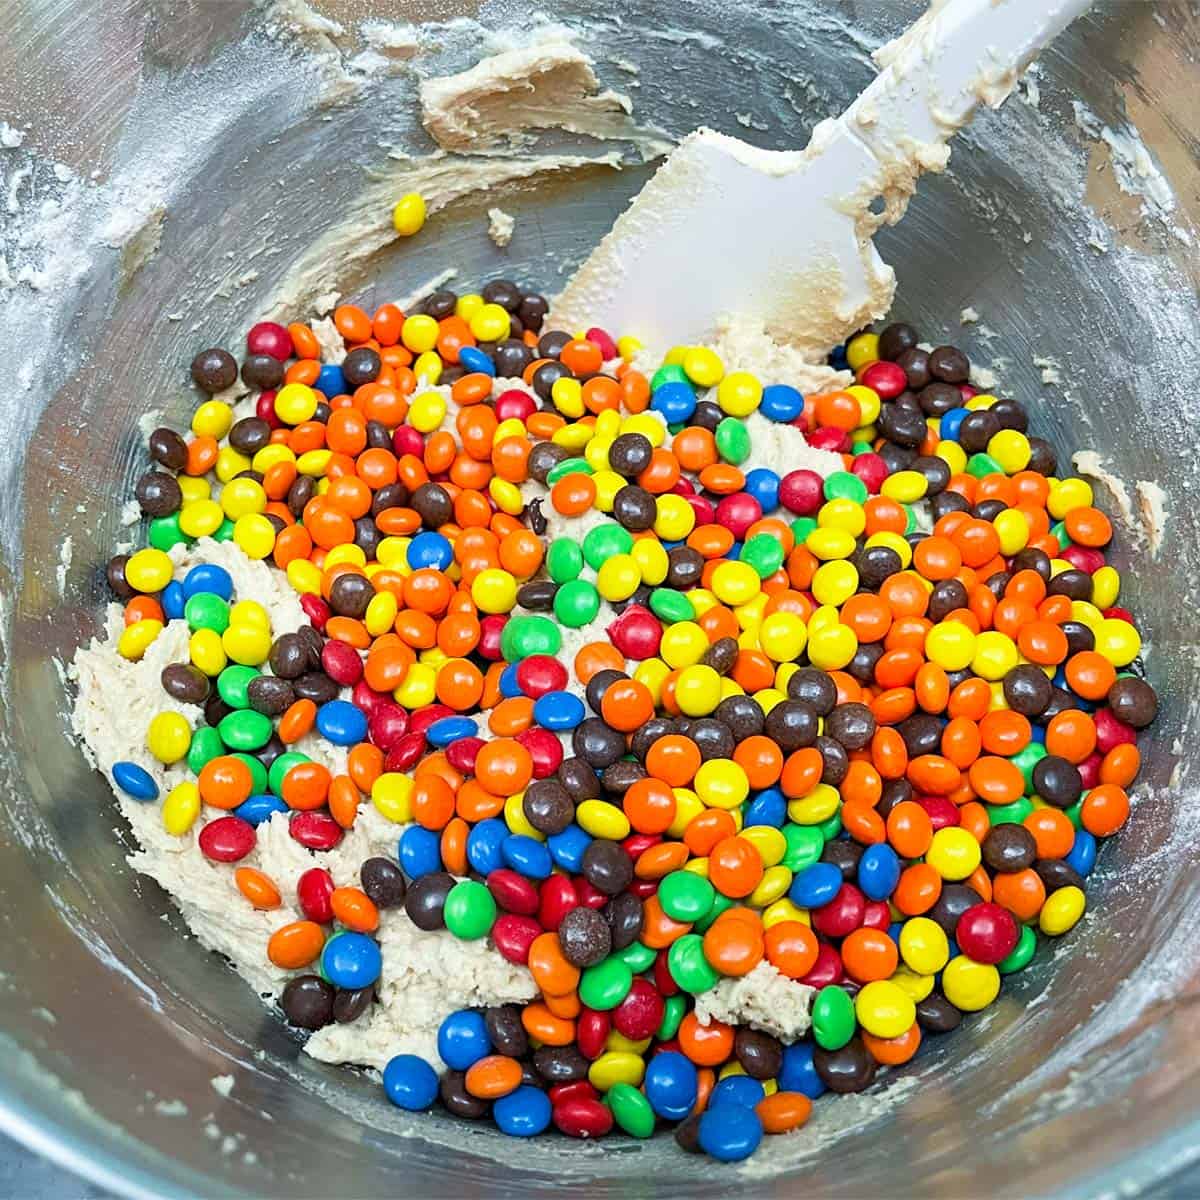 Mini M&M's along with Reese's mini pieces are added to the bowl of the peanut butter cookie dough.